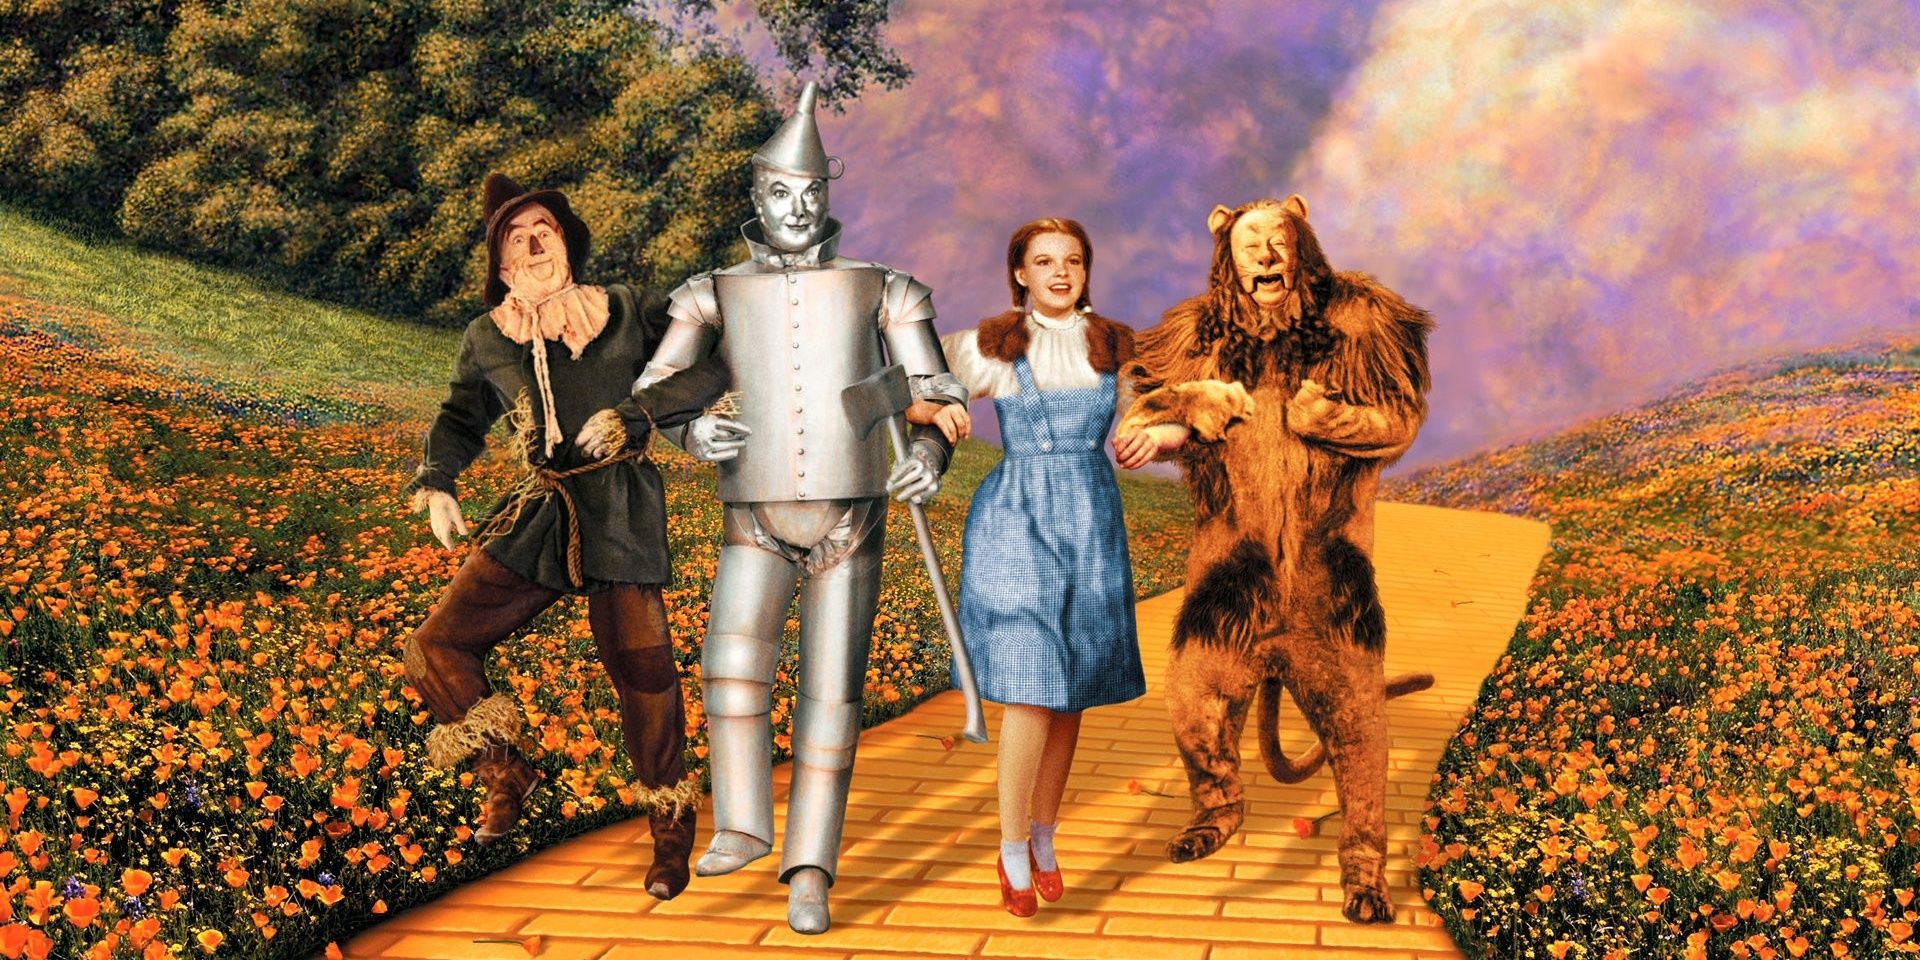 Dorothy, Scarecrow, Tin Man, Cowardly Lion on the yellow brick road in The Wizard of Oz